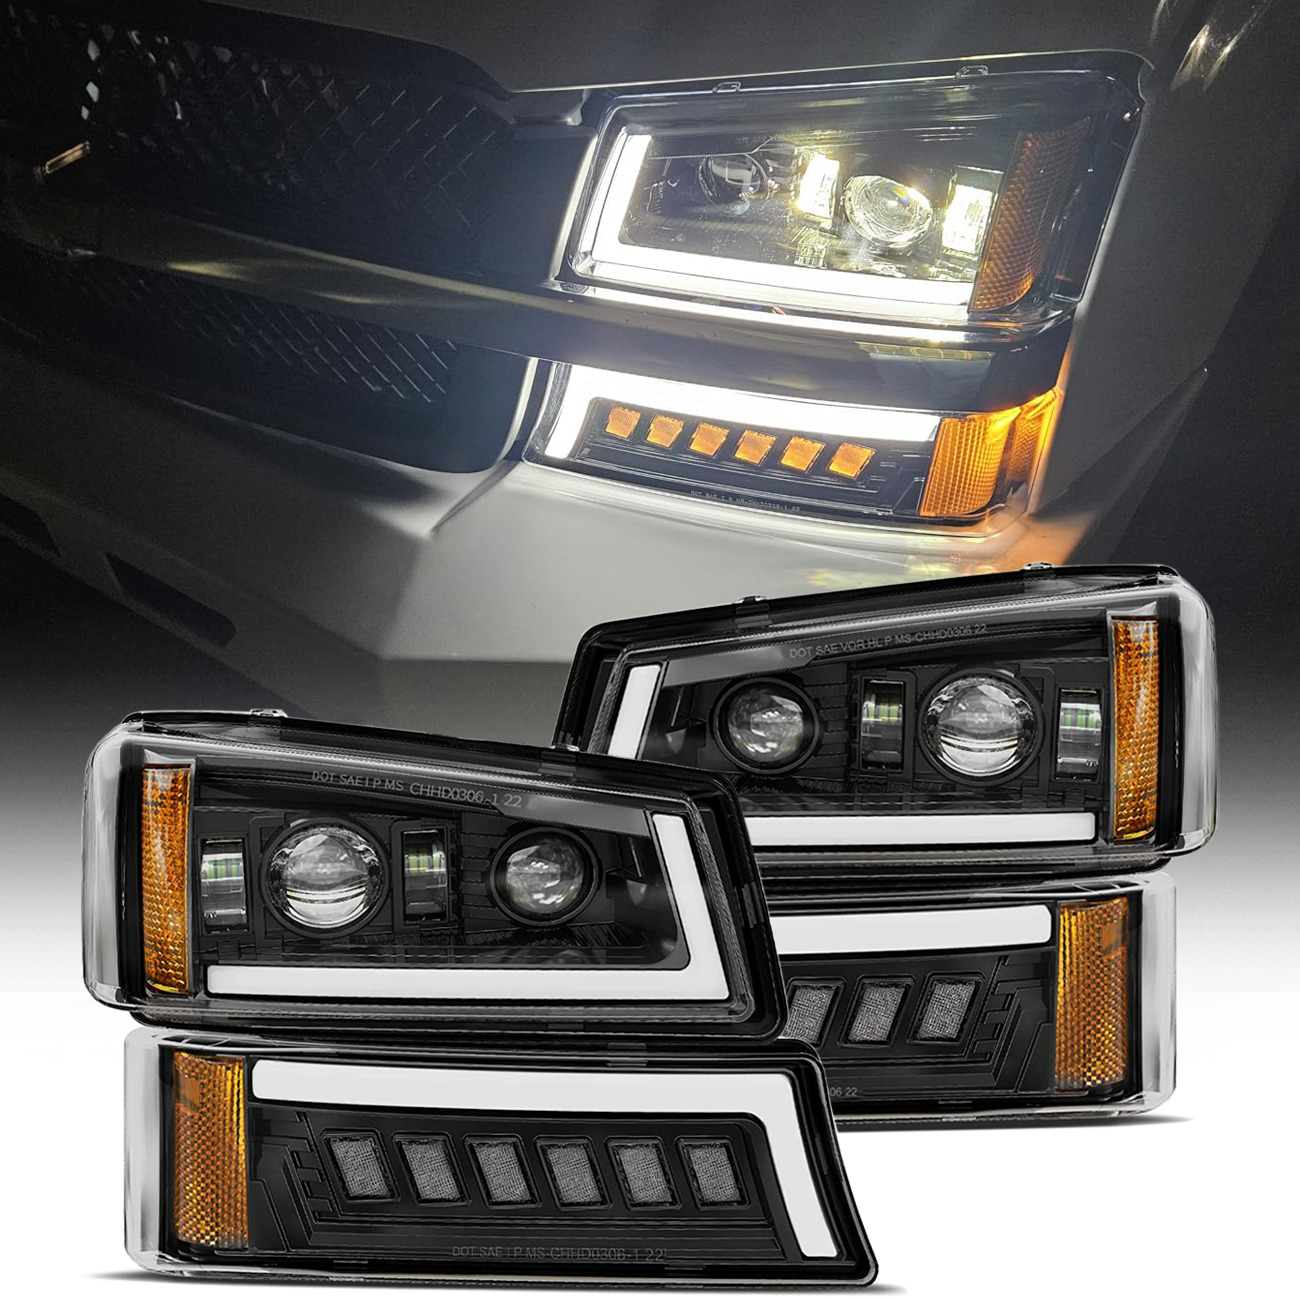 For 03-06 Chevy Silverado Avalanche DRL LED Headlights Bumper Signal Lamps